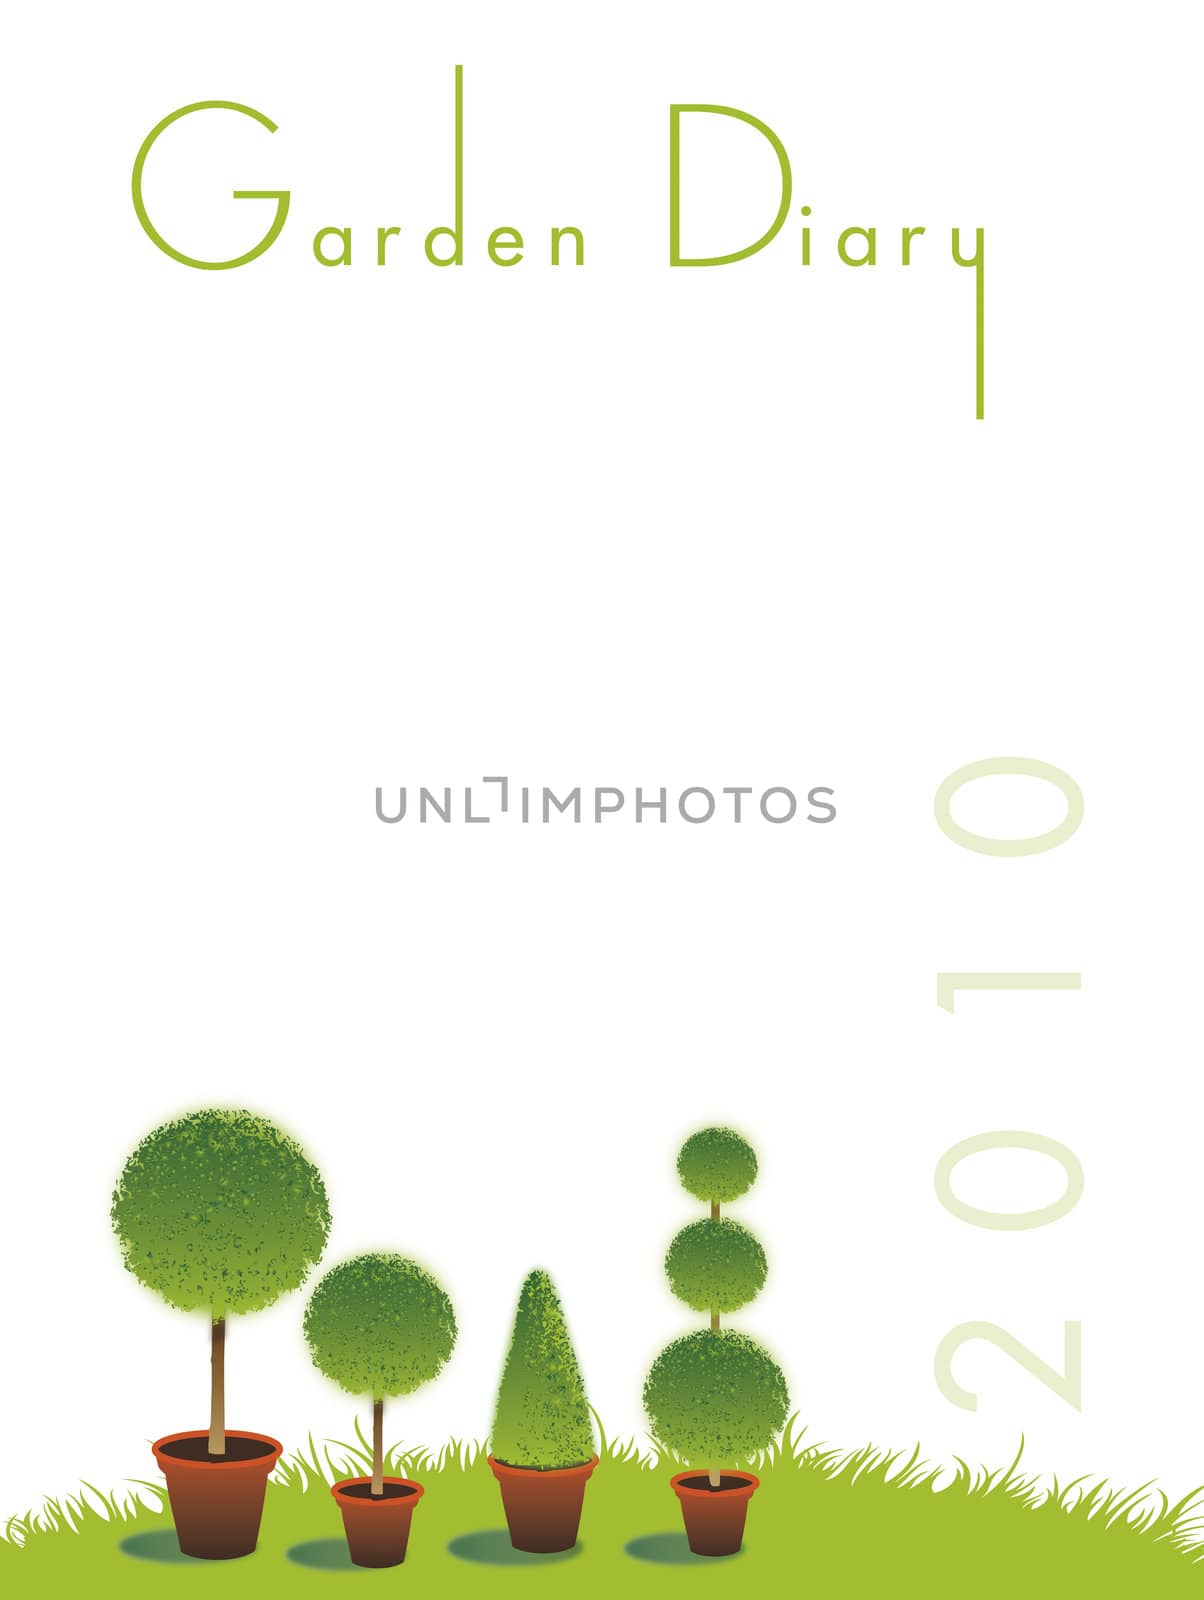 A portrait format image of topiary bushes set on a green grass background on an isolated white backdrop. Text to top spelling the words Gardening Diary, 2010. Room for additional copy.